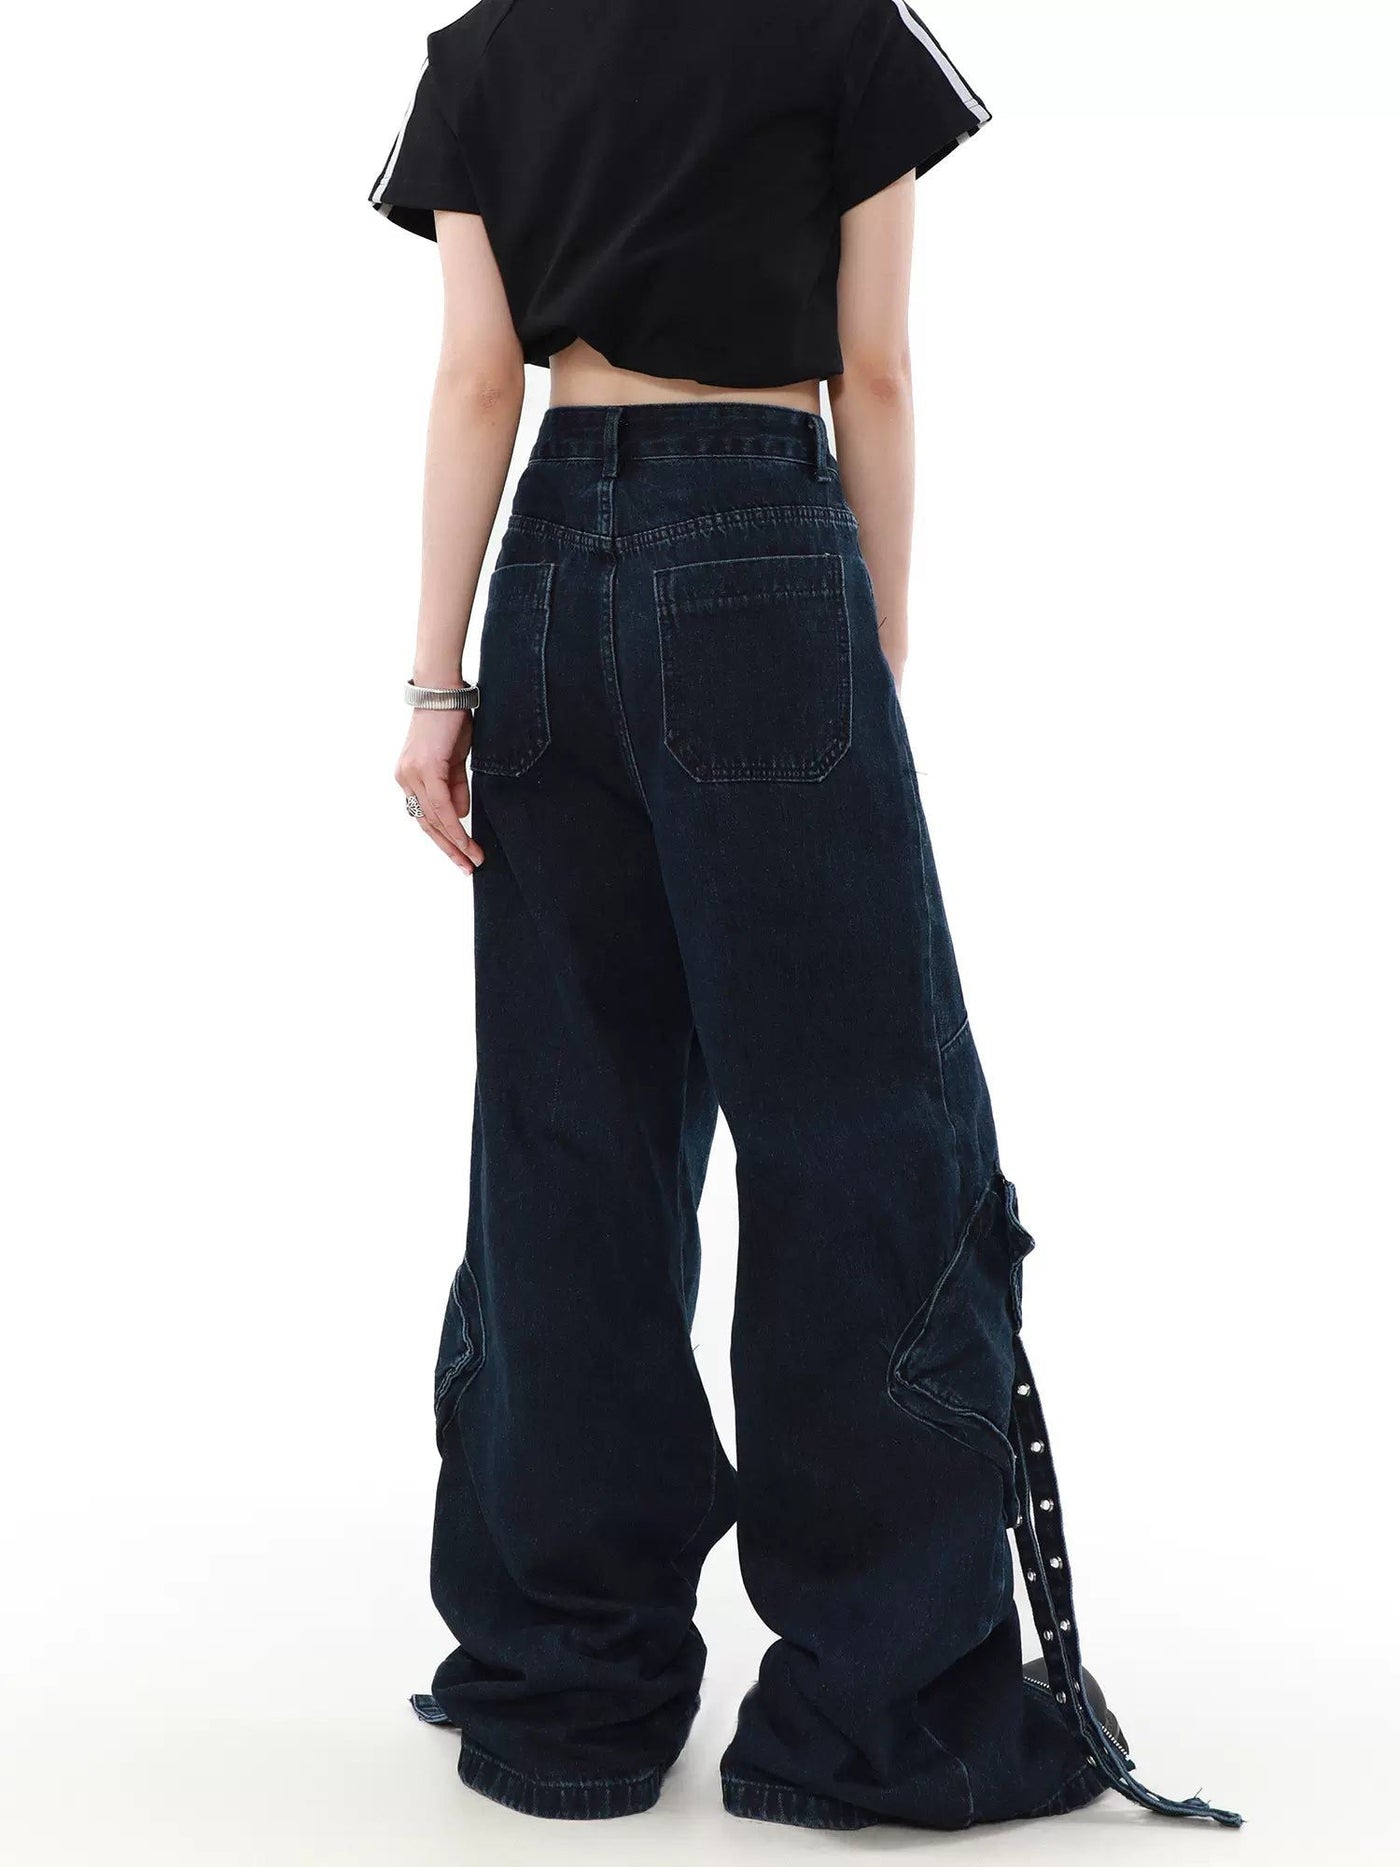 Strapped Tilted Pocket Jeans Korean Street Fashion Jeans By Mr Nearly Shop Online at OH Vault